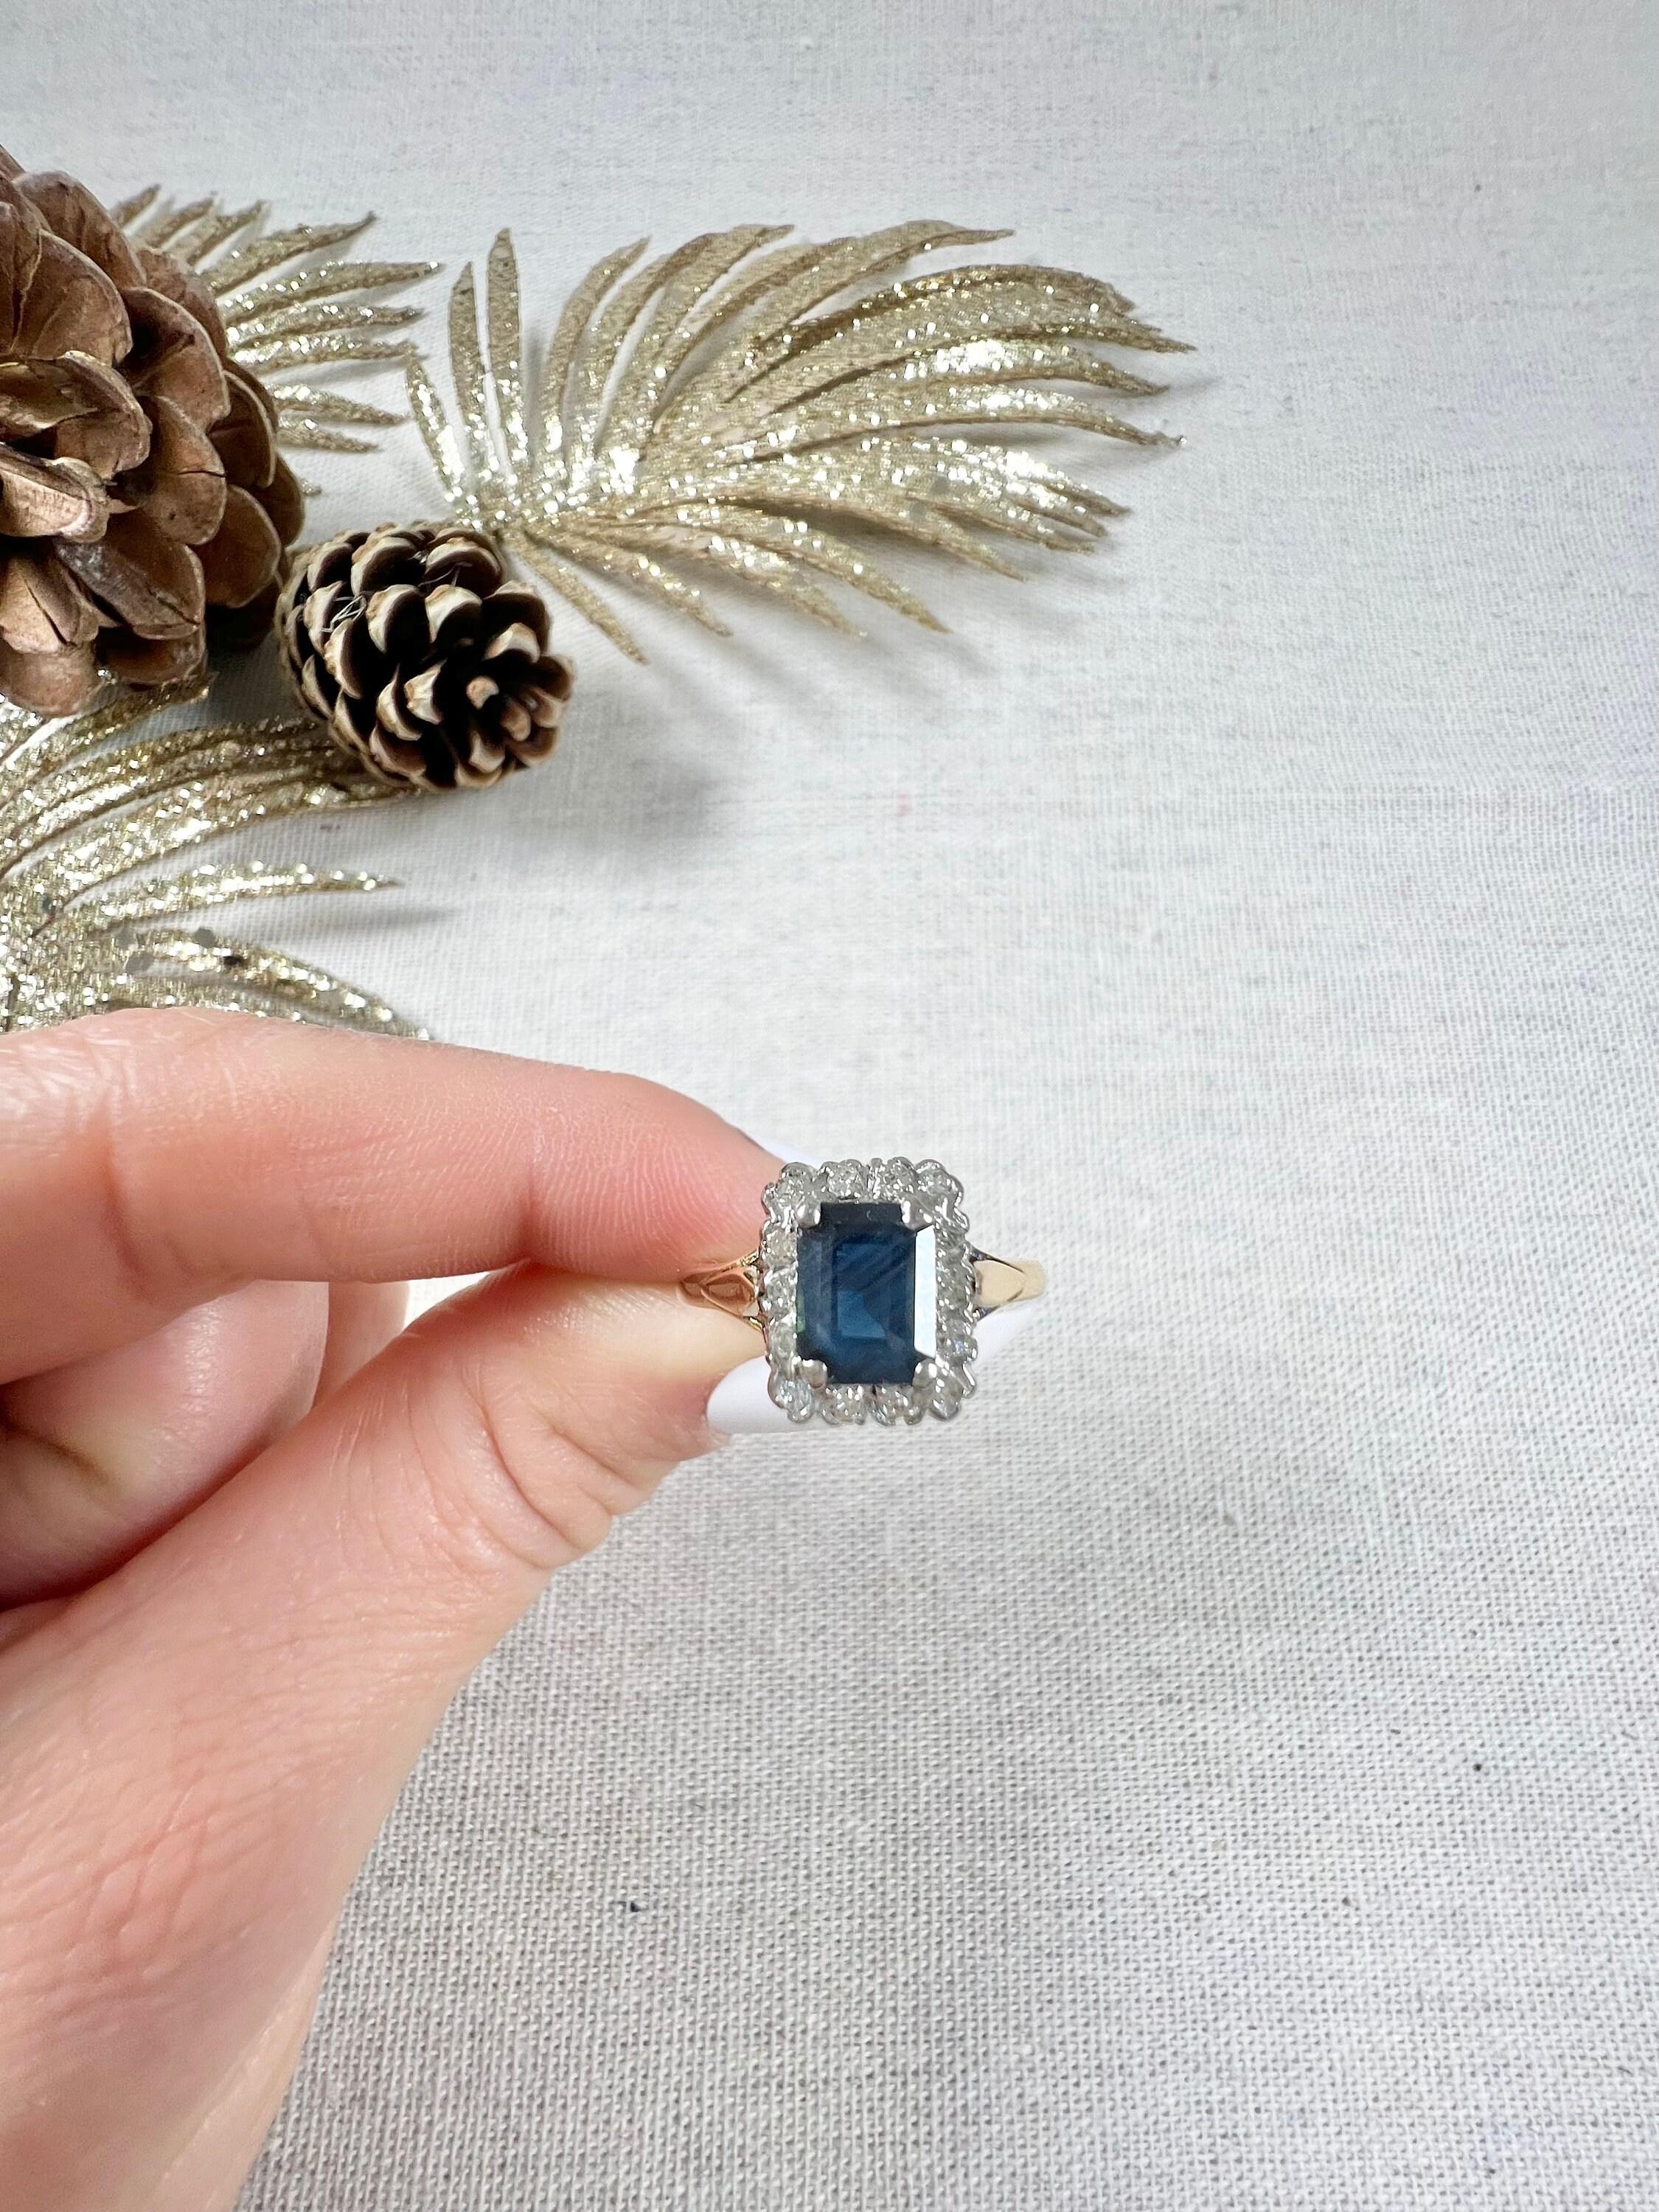 Vintage Sapphire & Diamond Ring 

18ct Gold Stamped 

Circa 1980s

This stunning vintage ring is truly a one-of-a-kind piece. Crafted from both yellow and white 18ct gold, this cluster ring features a beautiful emerald-cut natural sapphire stone at